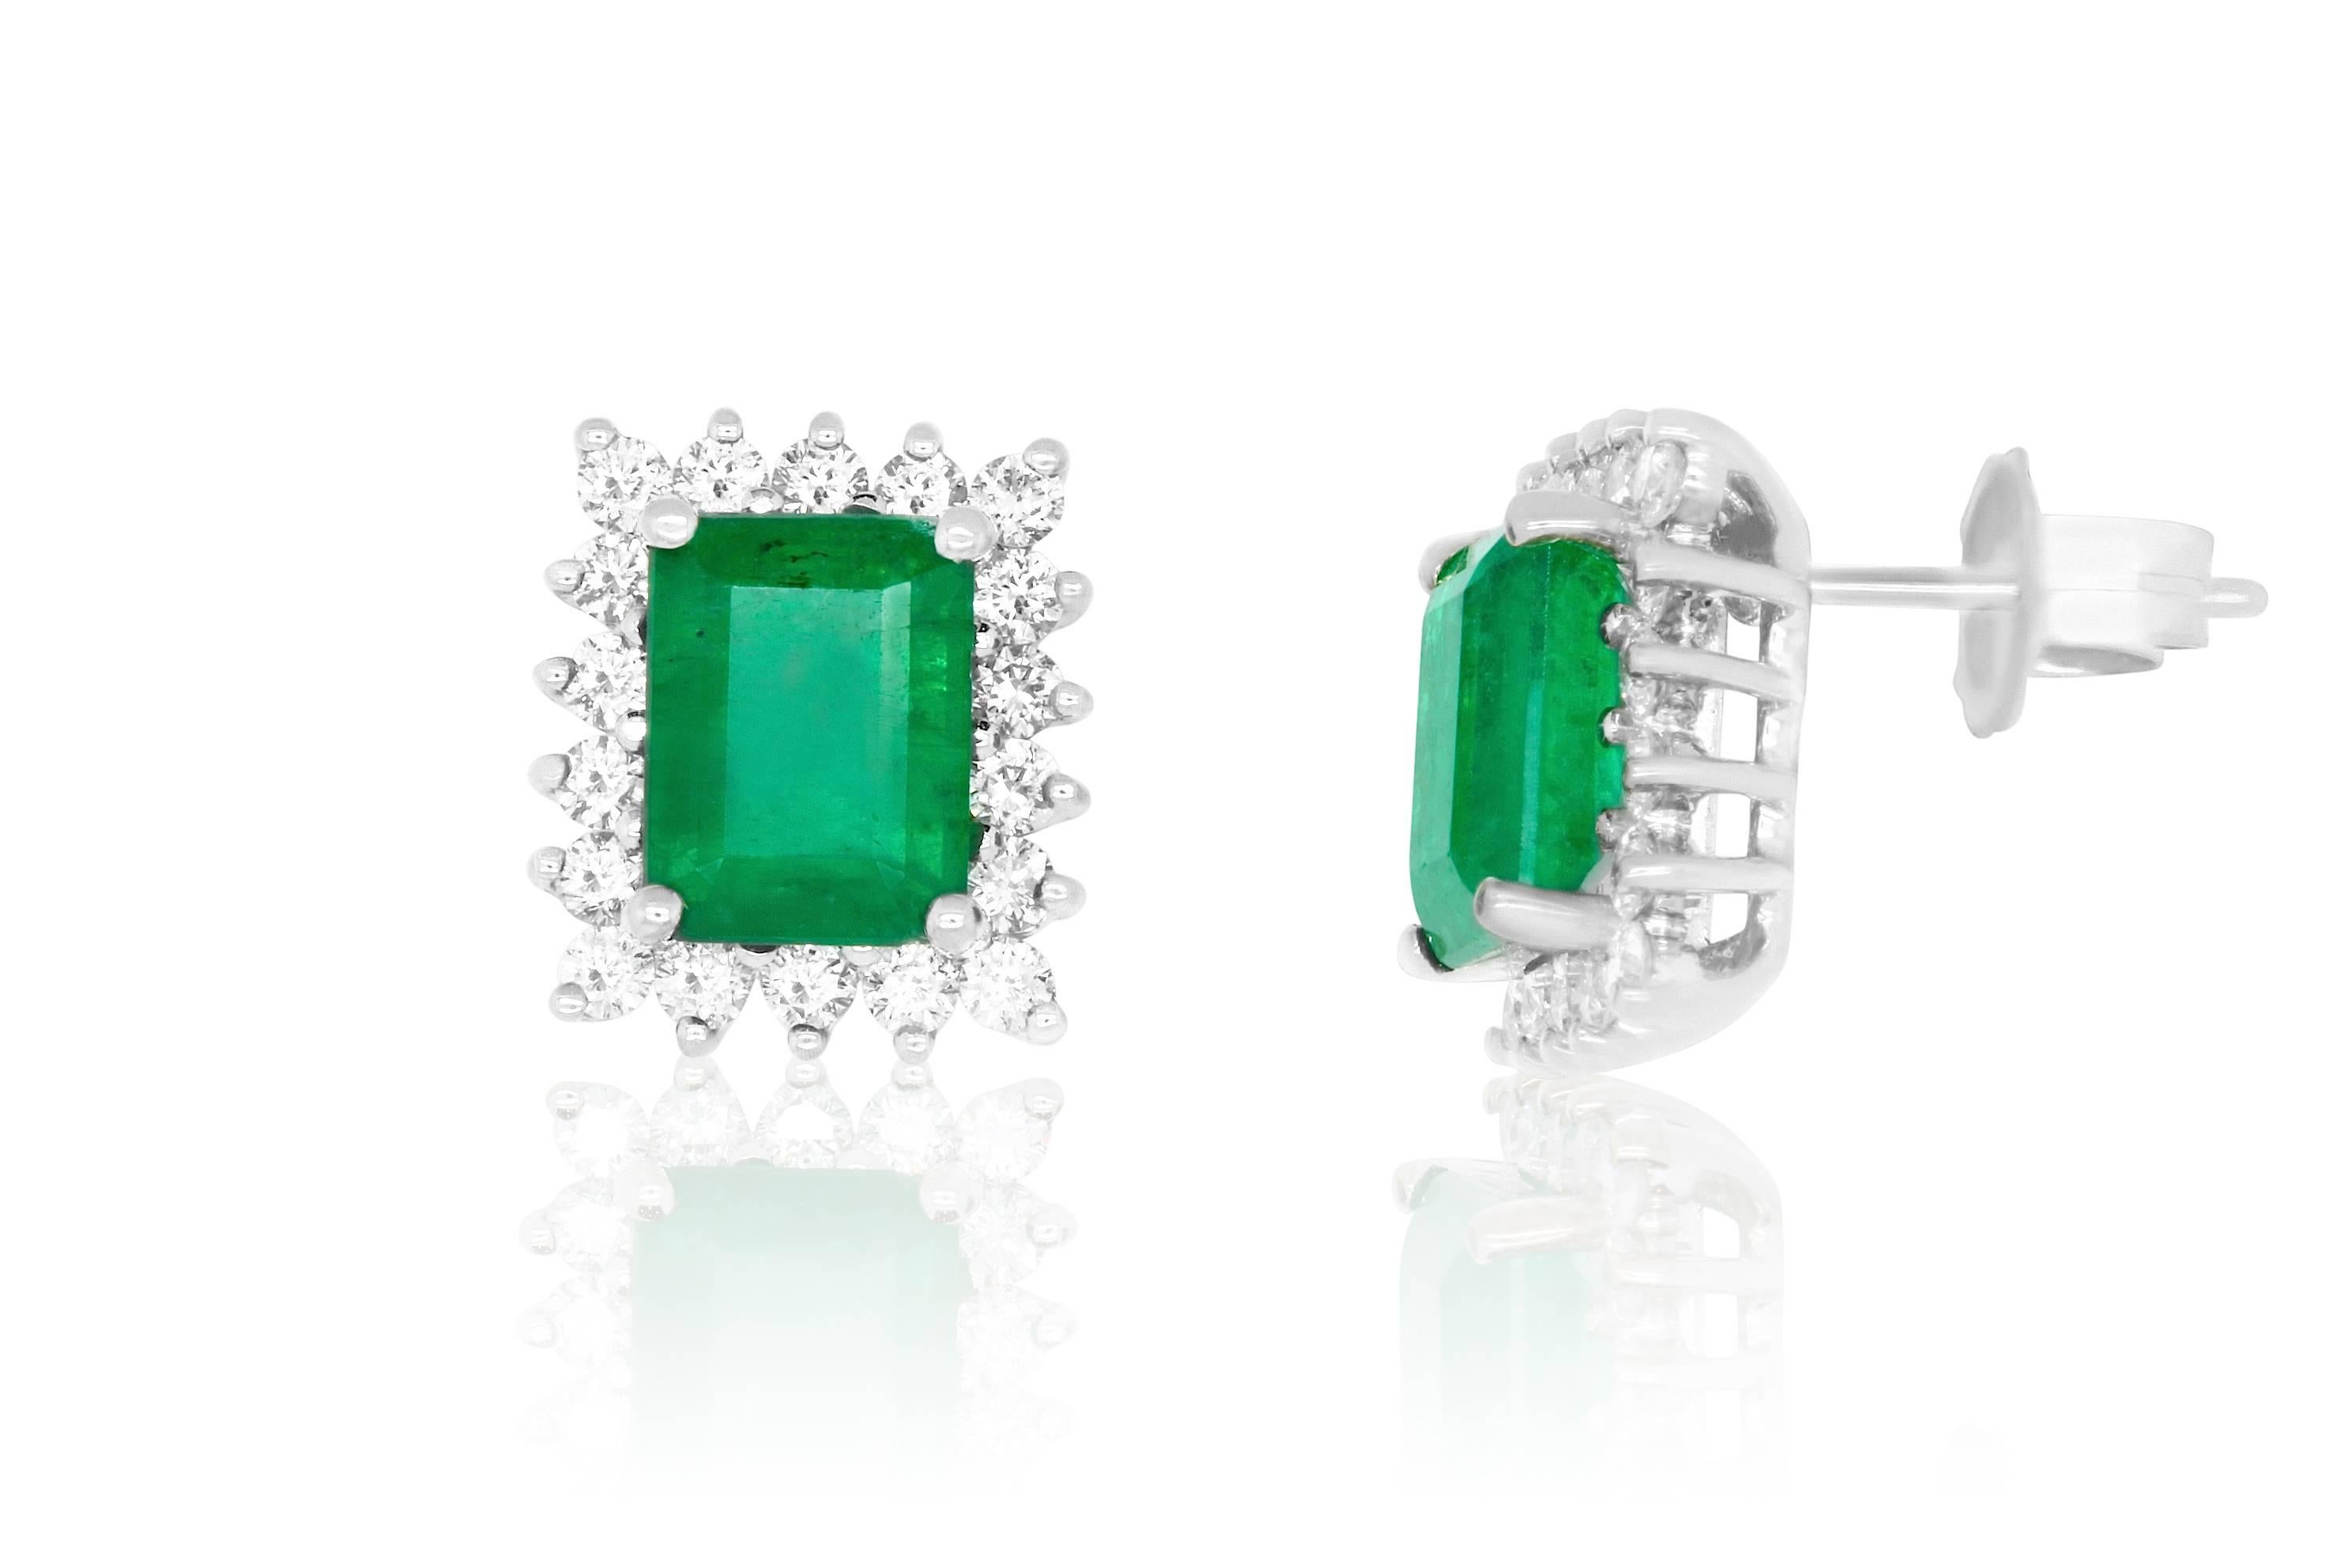 We were astonished to find a pair of Emerald Cut Emeralds so perfectly matched in quality, color, and size, we just had to turn them into earrings! 

Material: 14k White Gold 
Stone Details: 2 Emerald Cut Emeralds at 3.33 Carats Total Weight -